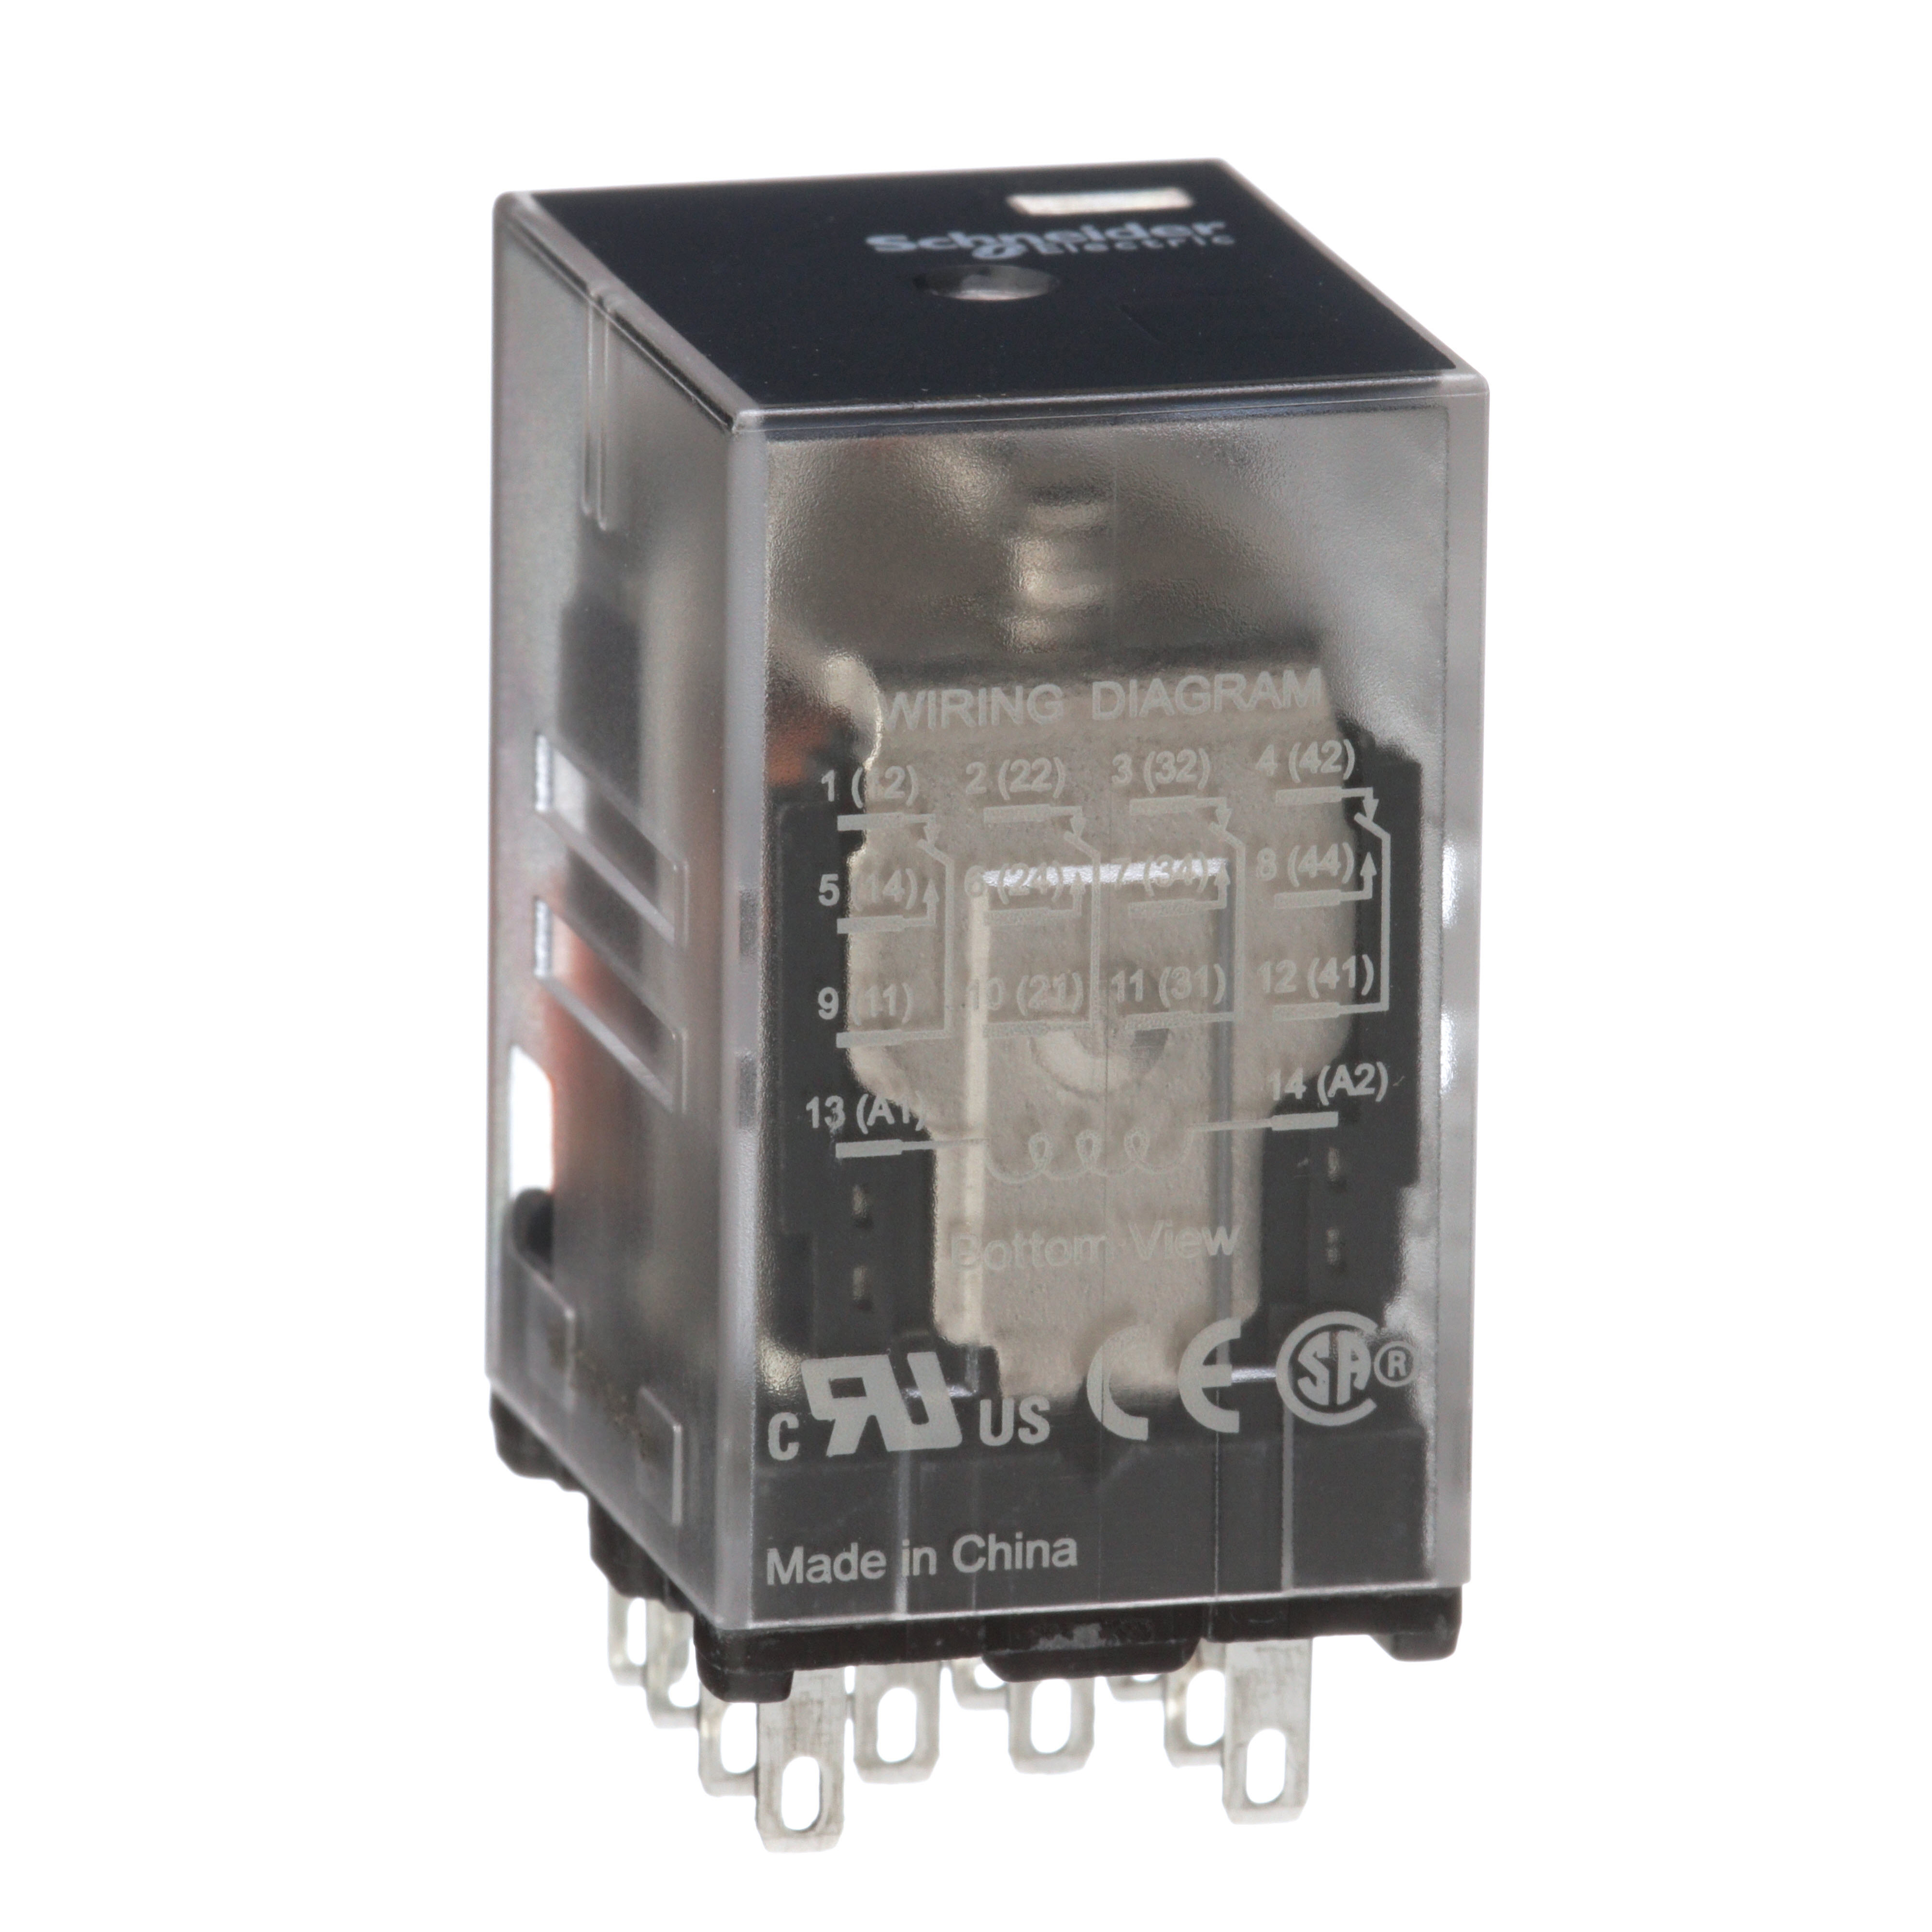 Power relay, SE Relays, 4PDT, 3A, 12 VAC, low level bifurcated contacts, clear cover